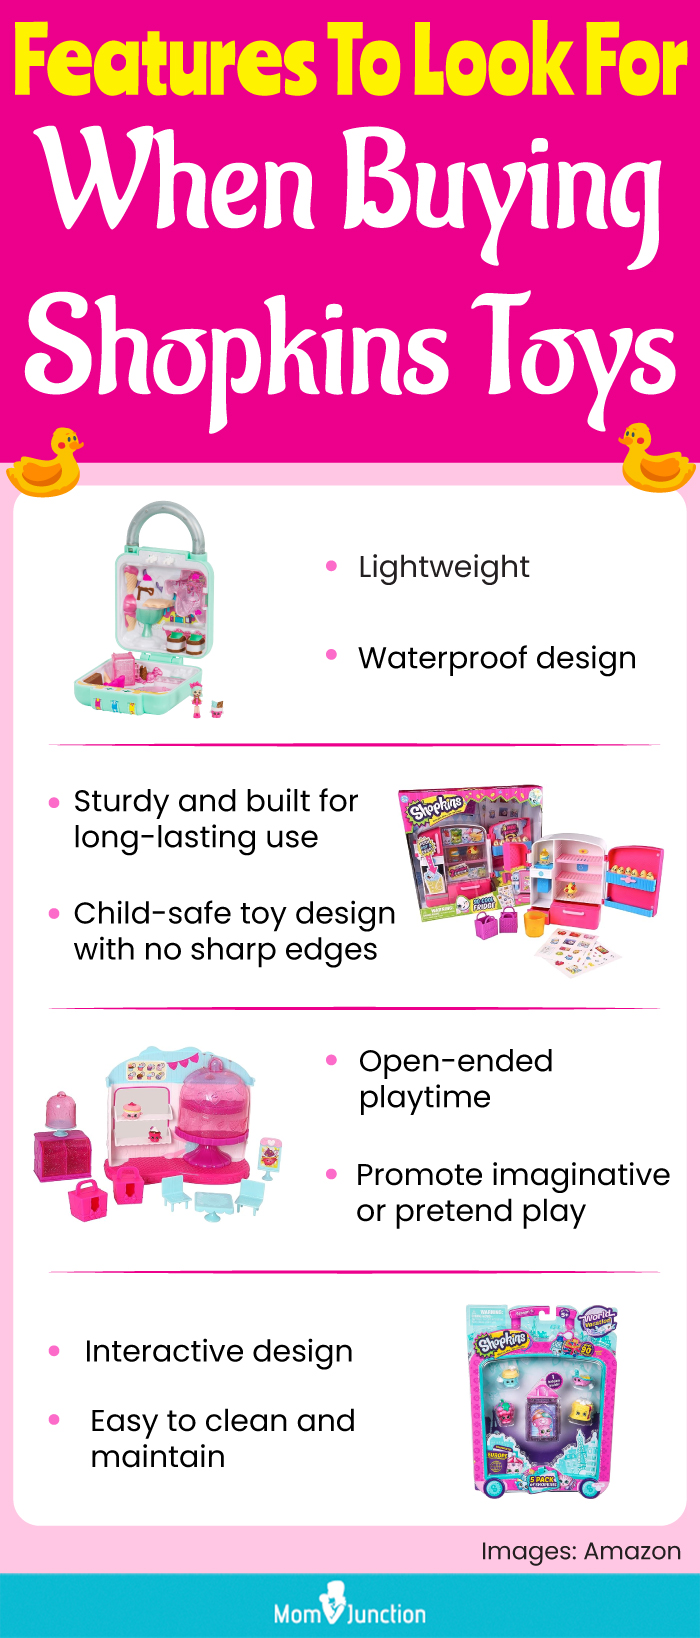 Features To Look For When Buying Shopkins Toys (infographic)